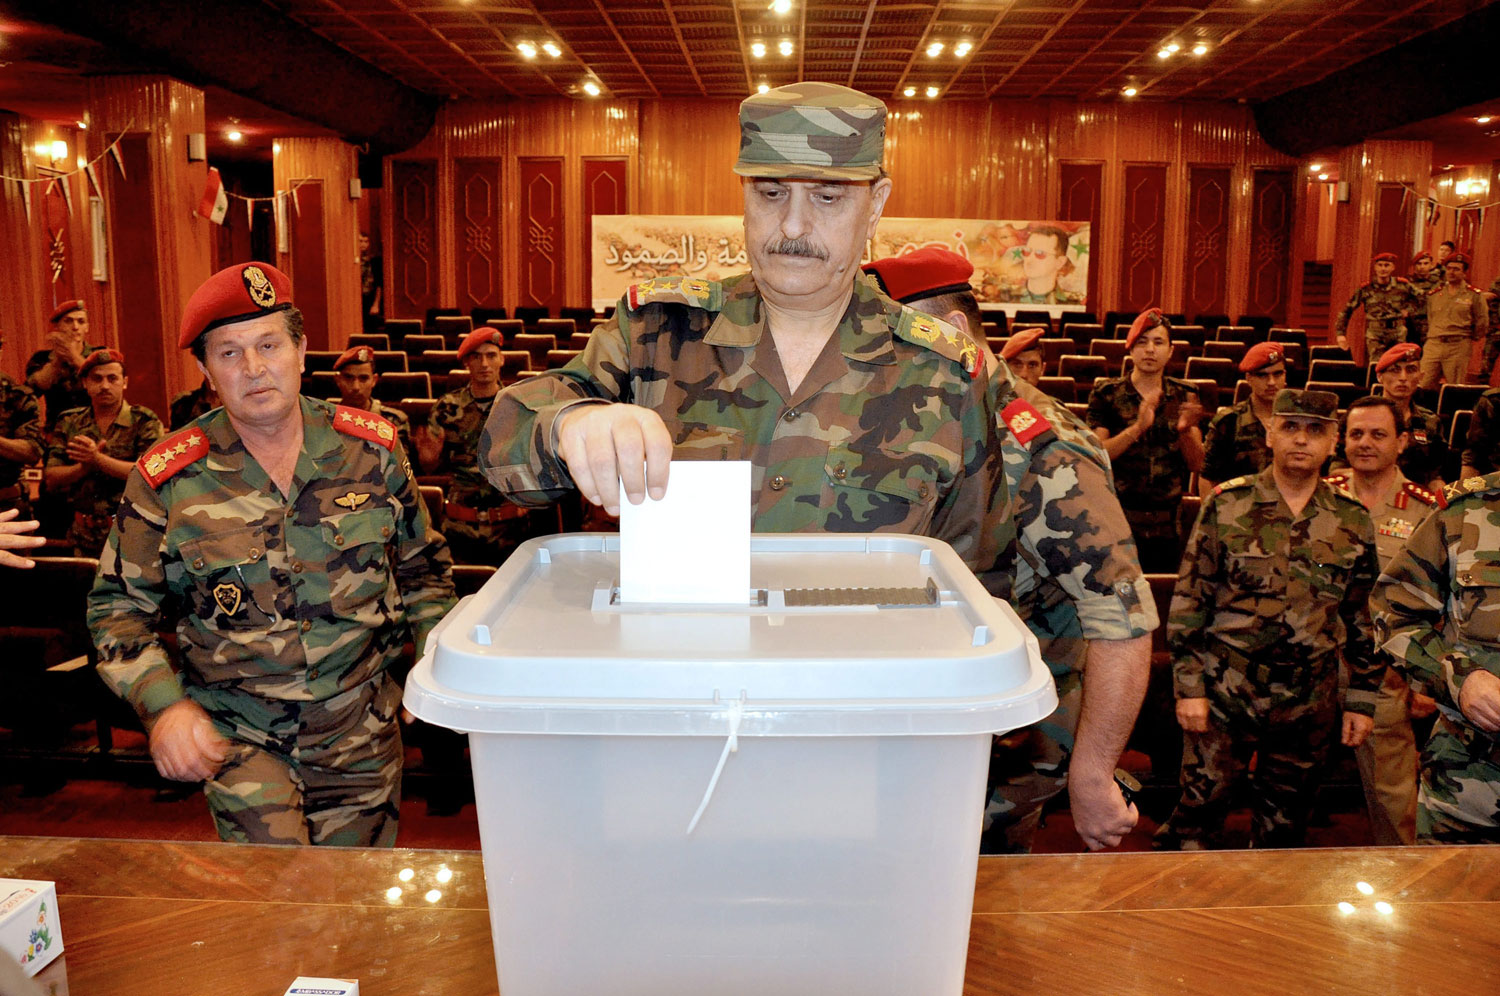 Syrian Defence Minister Fahd Jassem al-Freij casting his ballot at a polling station in Damascus on June 3, 2014.